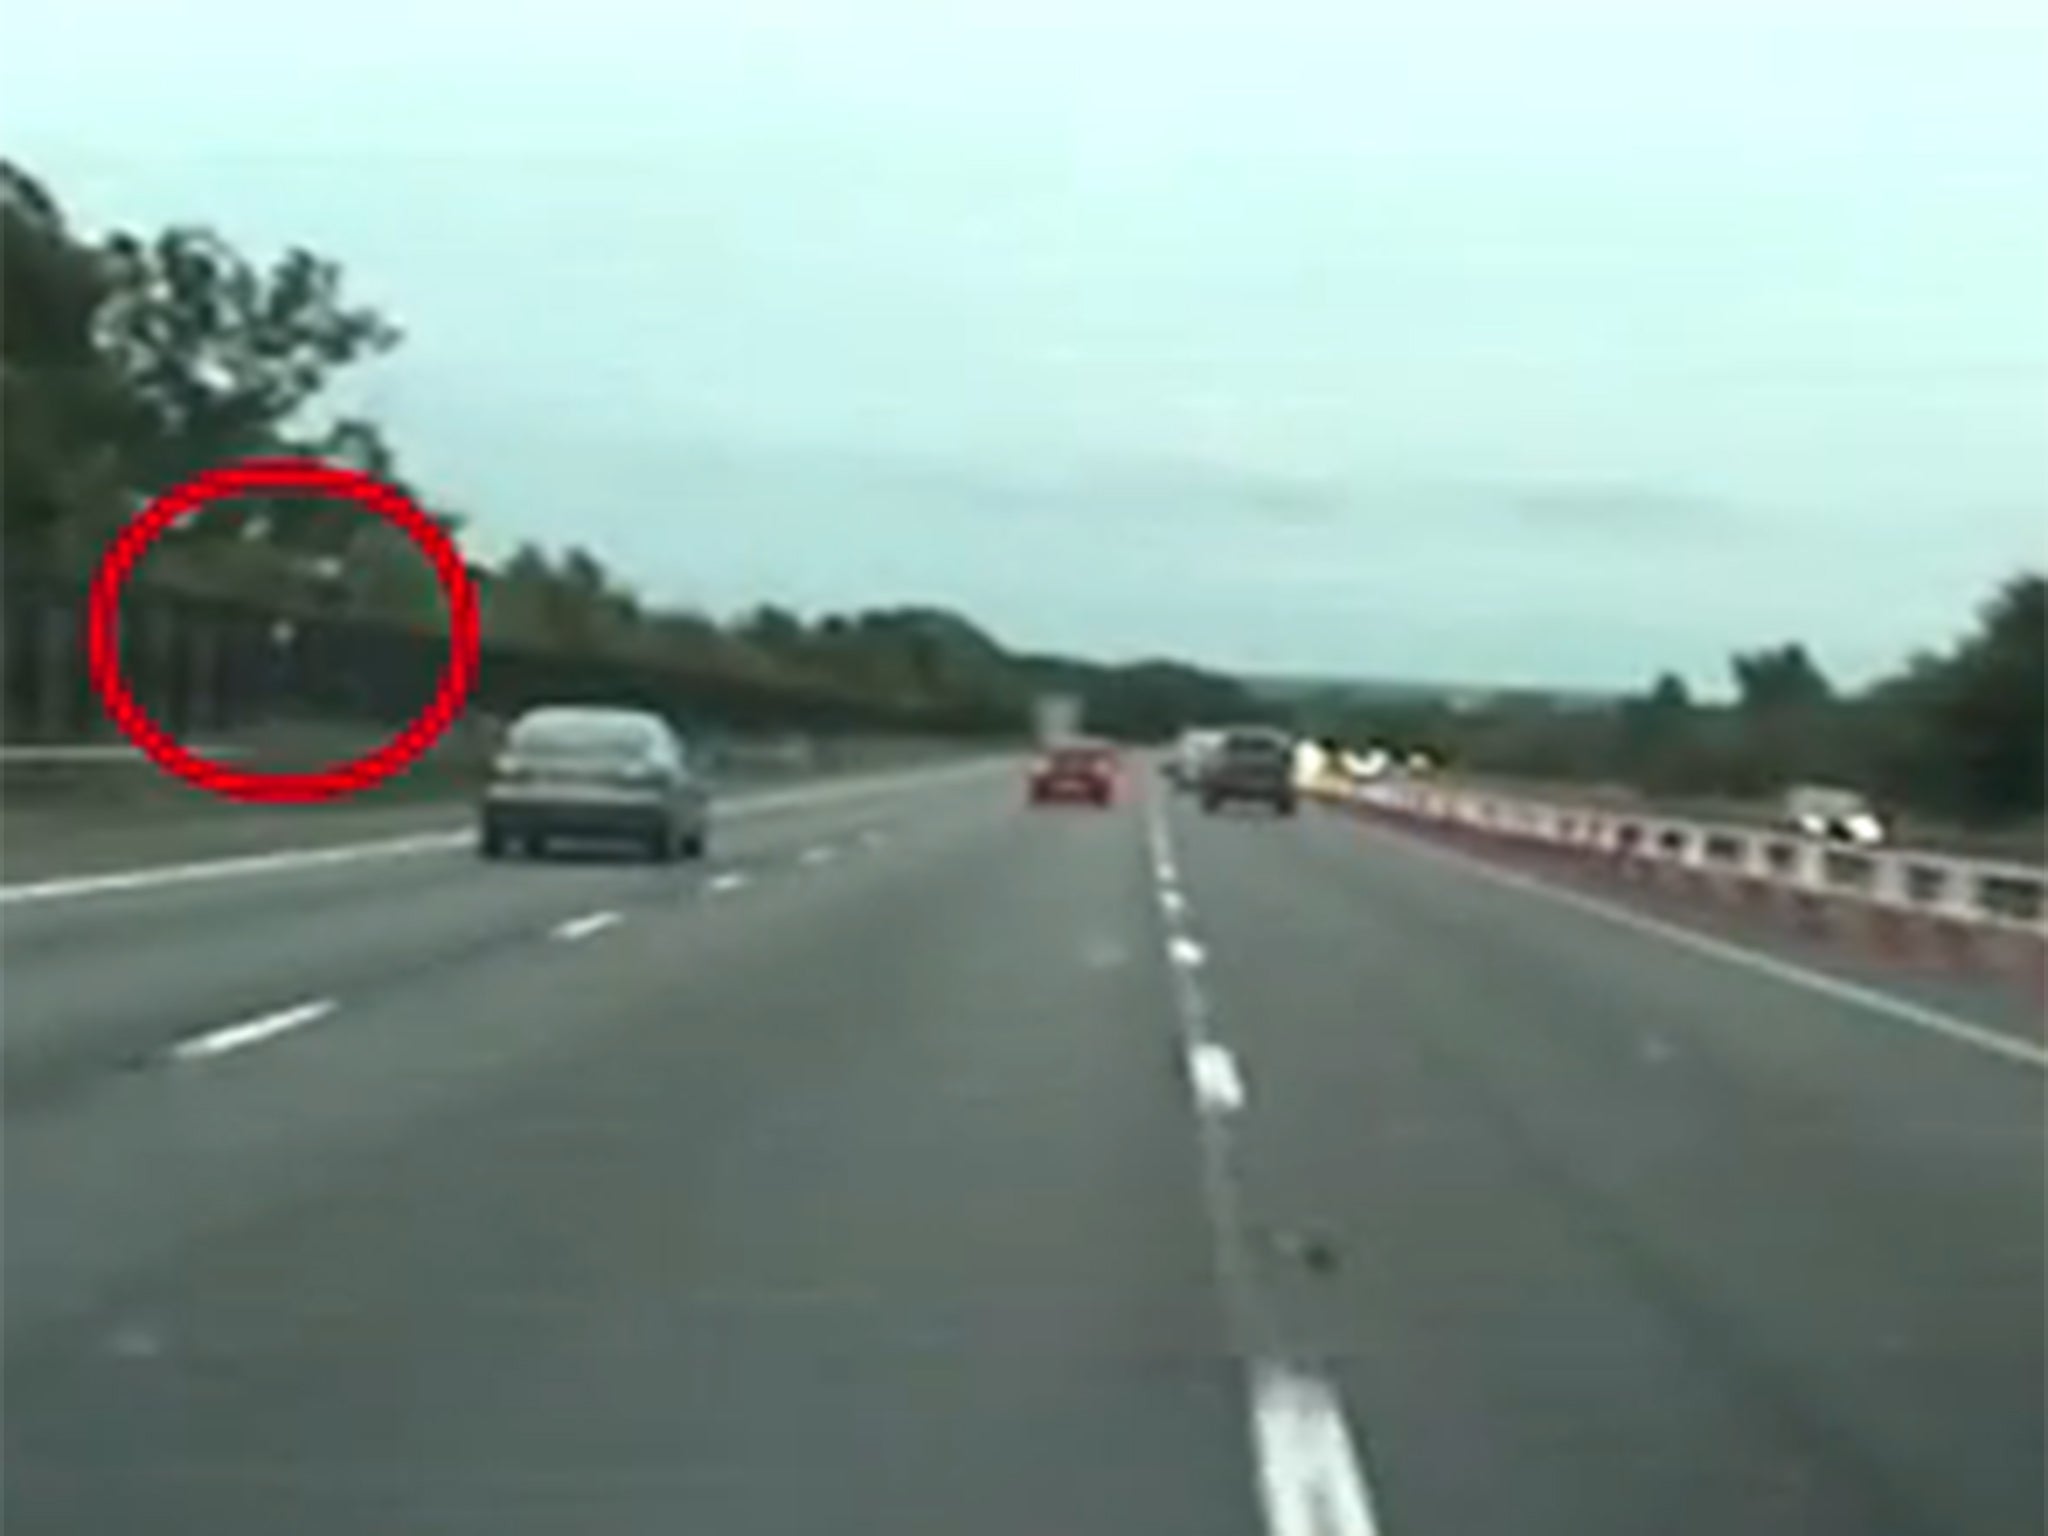 The moment a bag of heroin is thrown from the moving vehicle